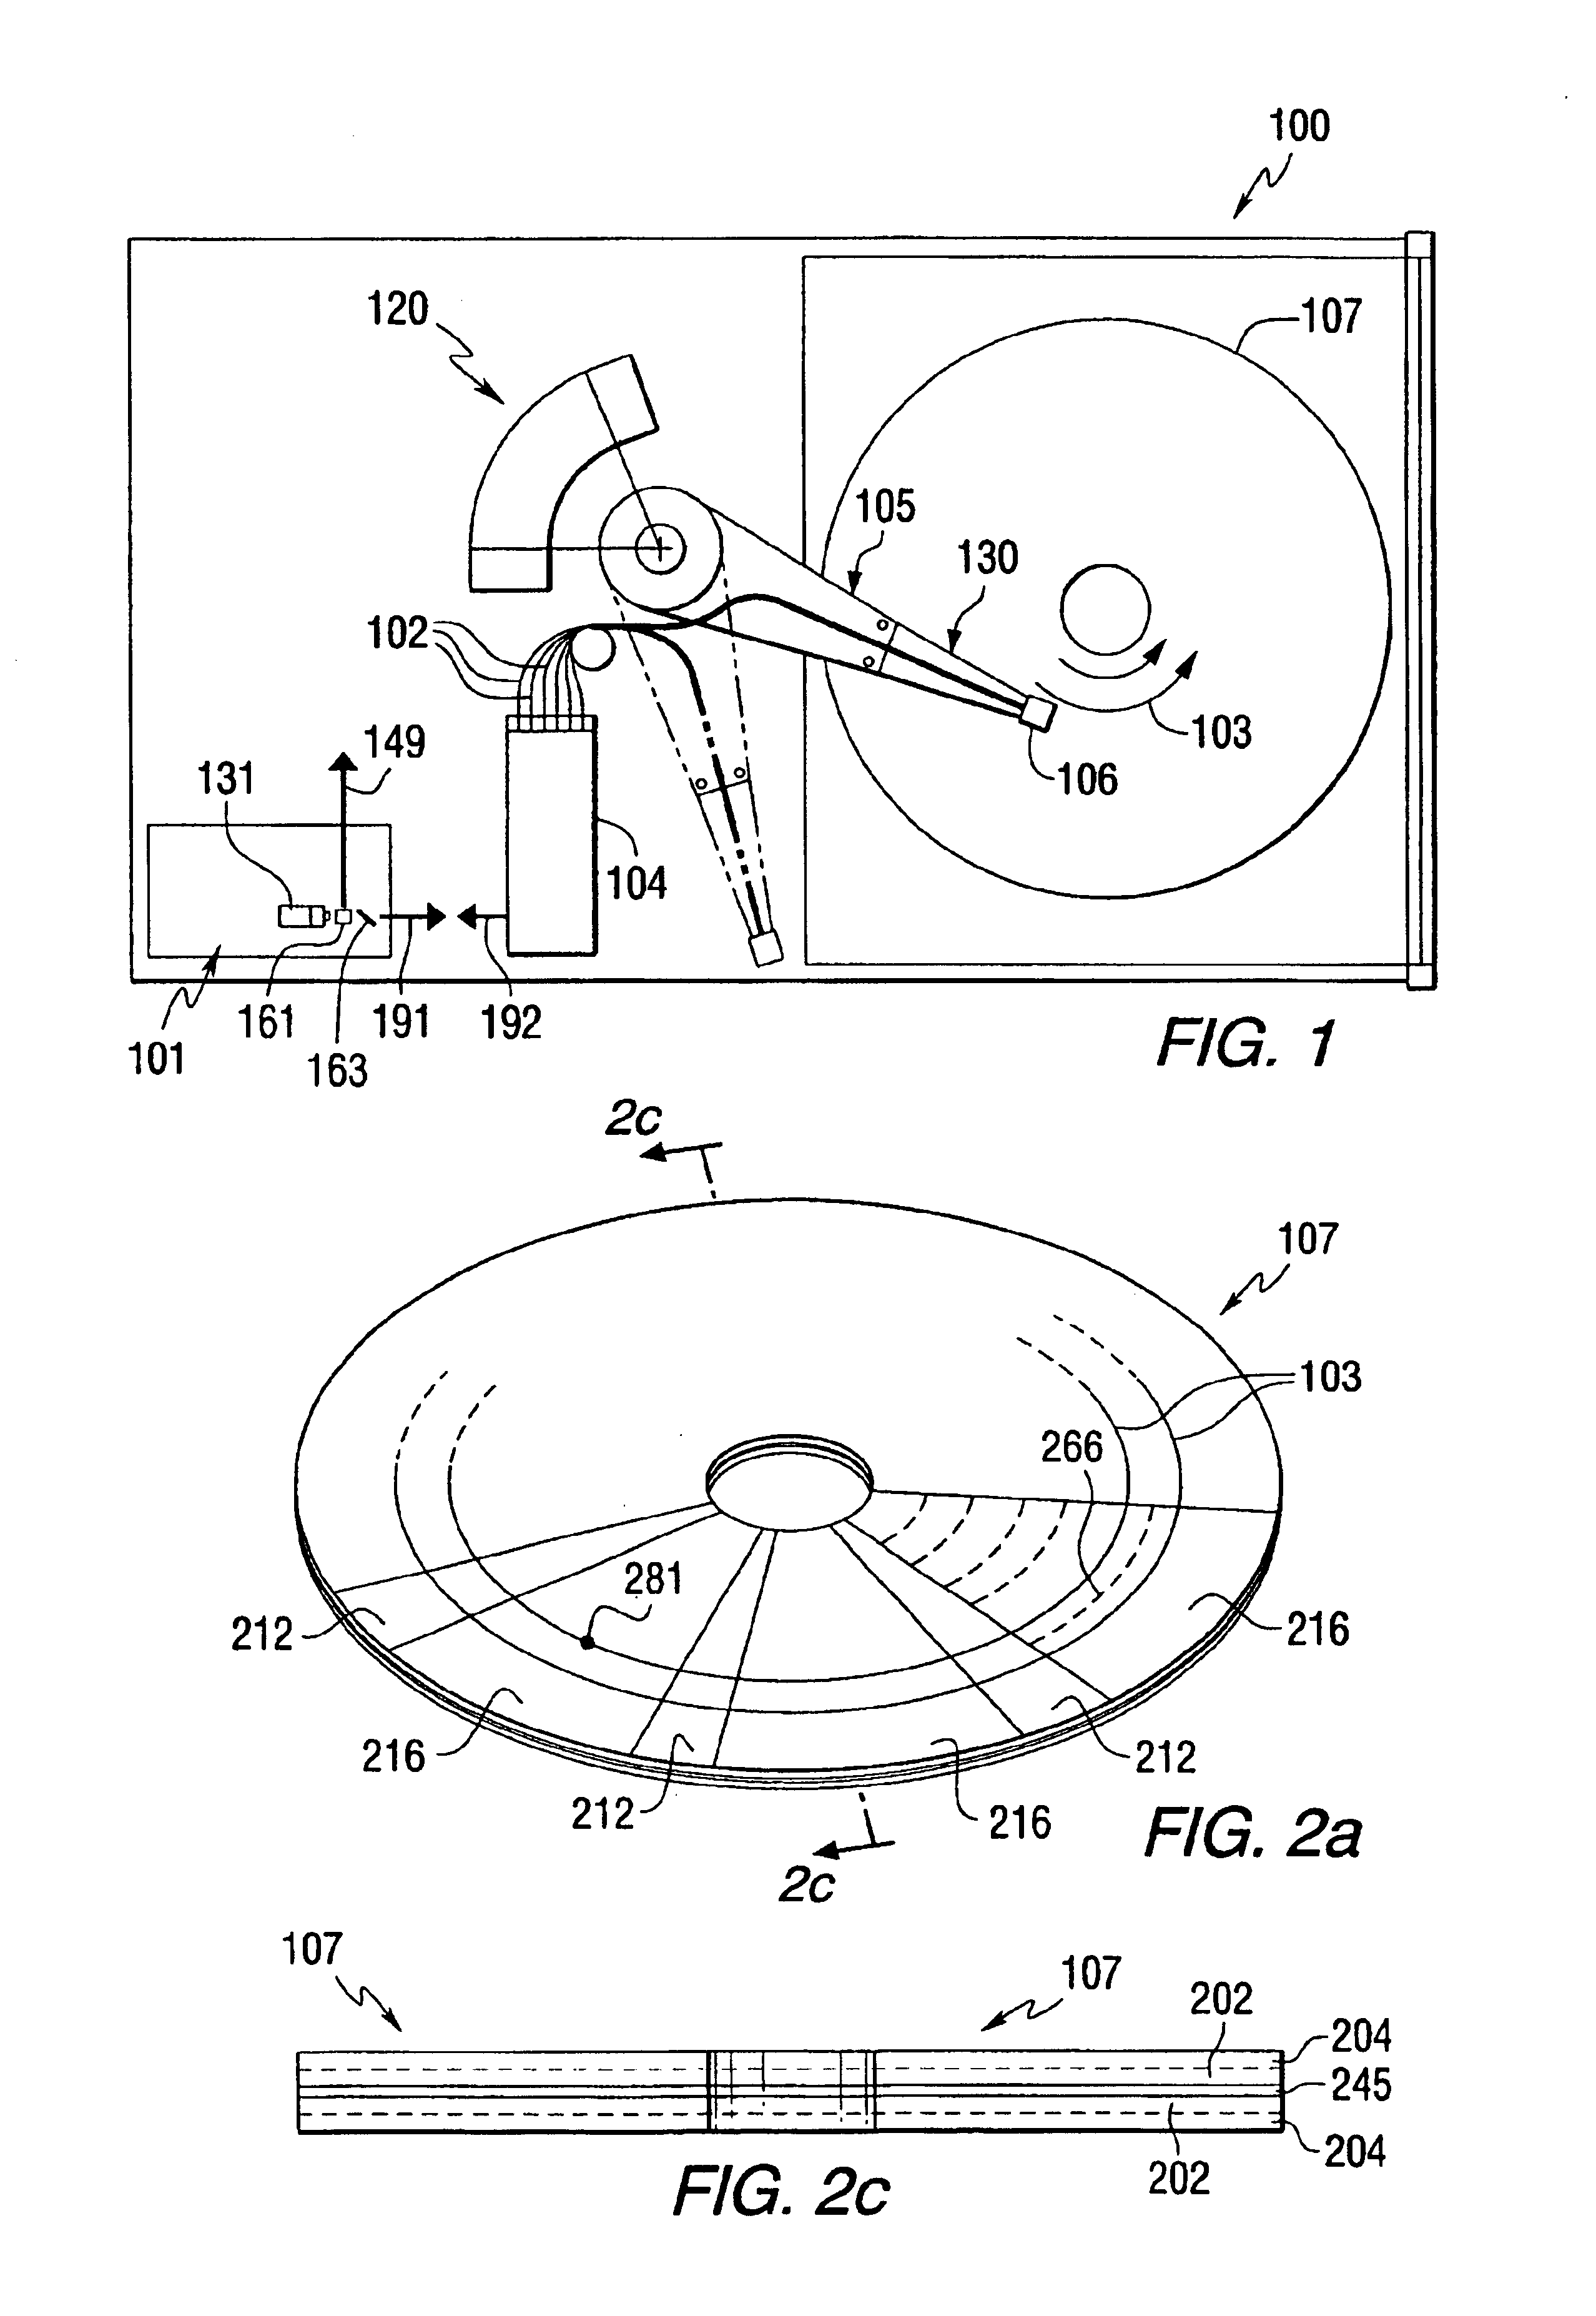 Laser assisted track width definition and radial control with magnetic recording